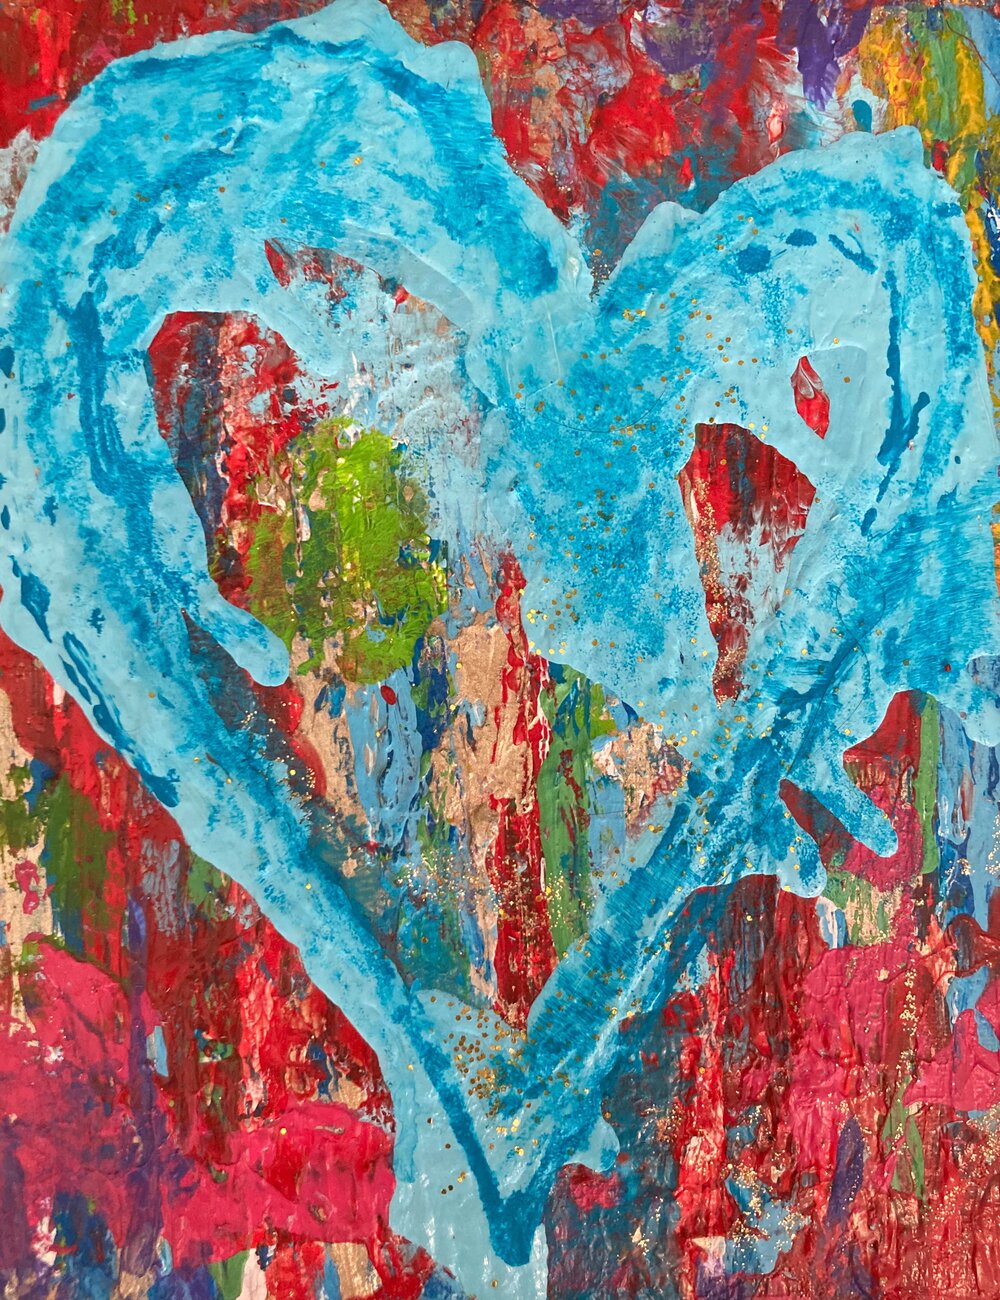 Happy Heart Paintings by Heather Harrington — Life and Whim Studio